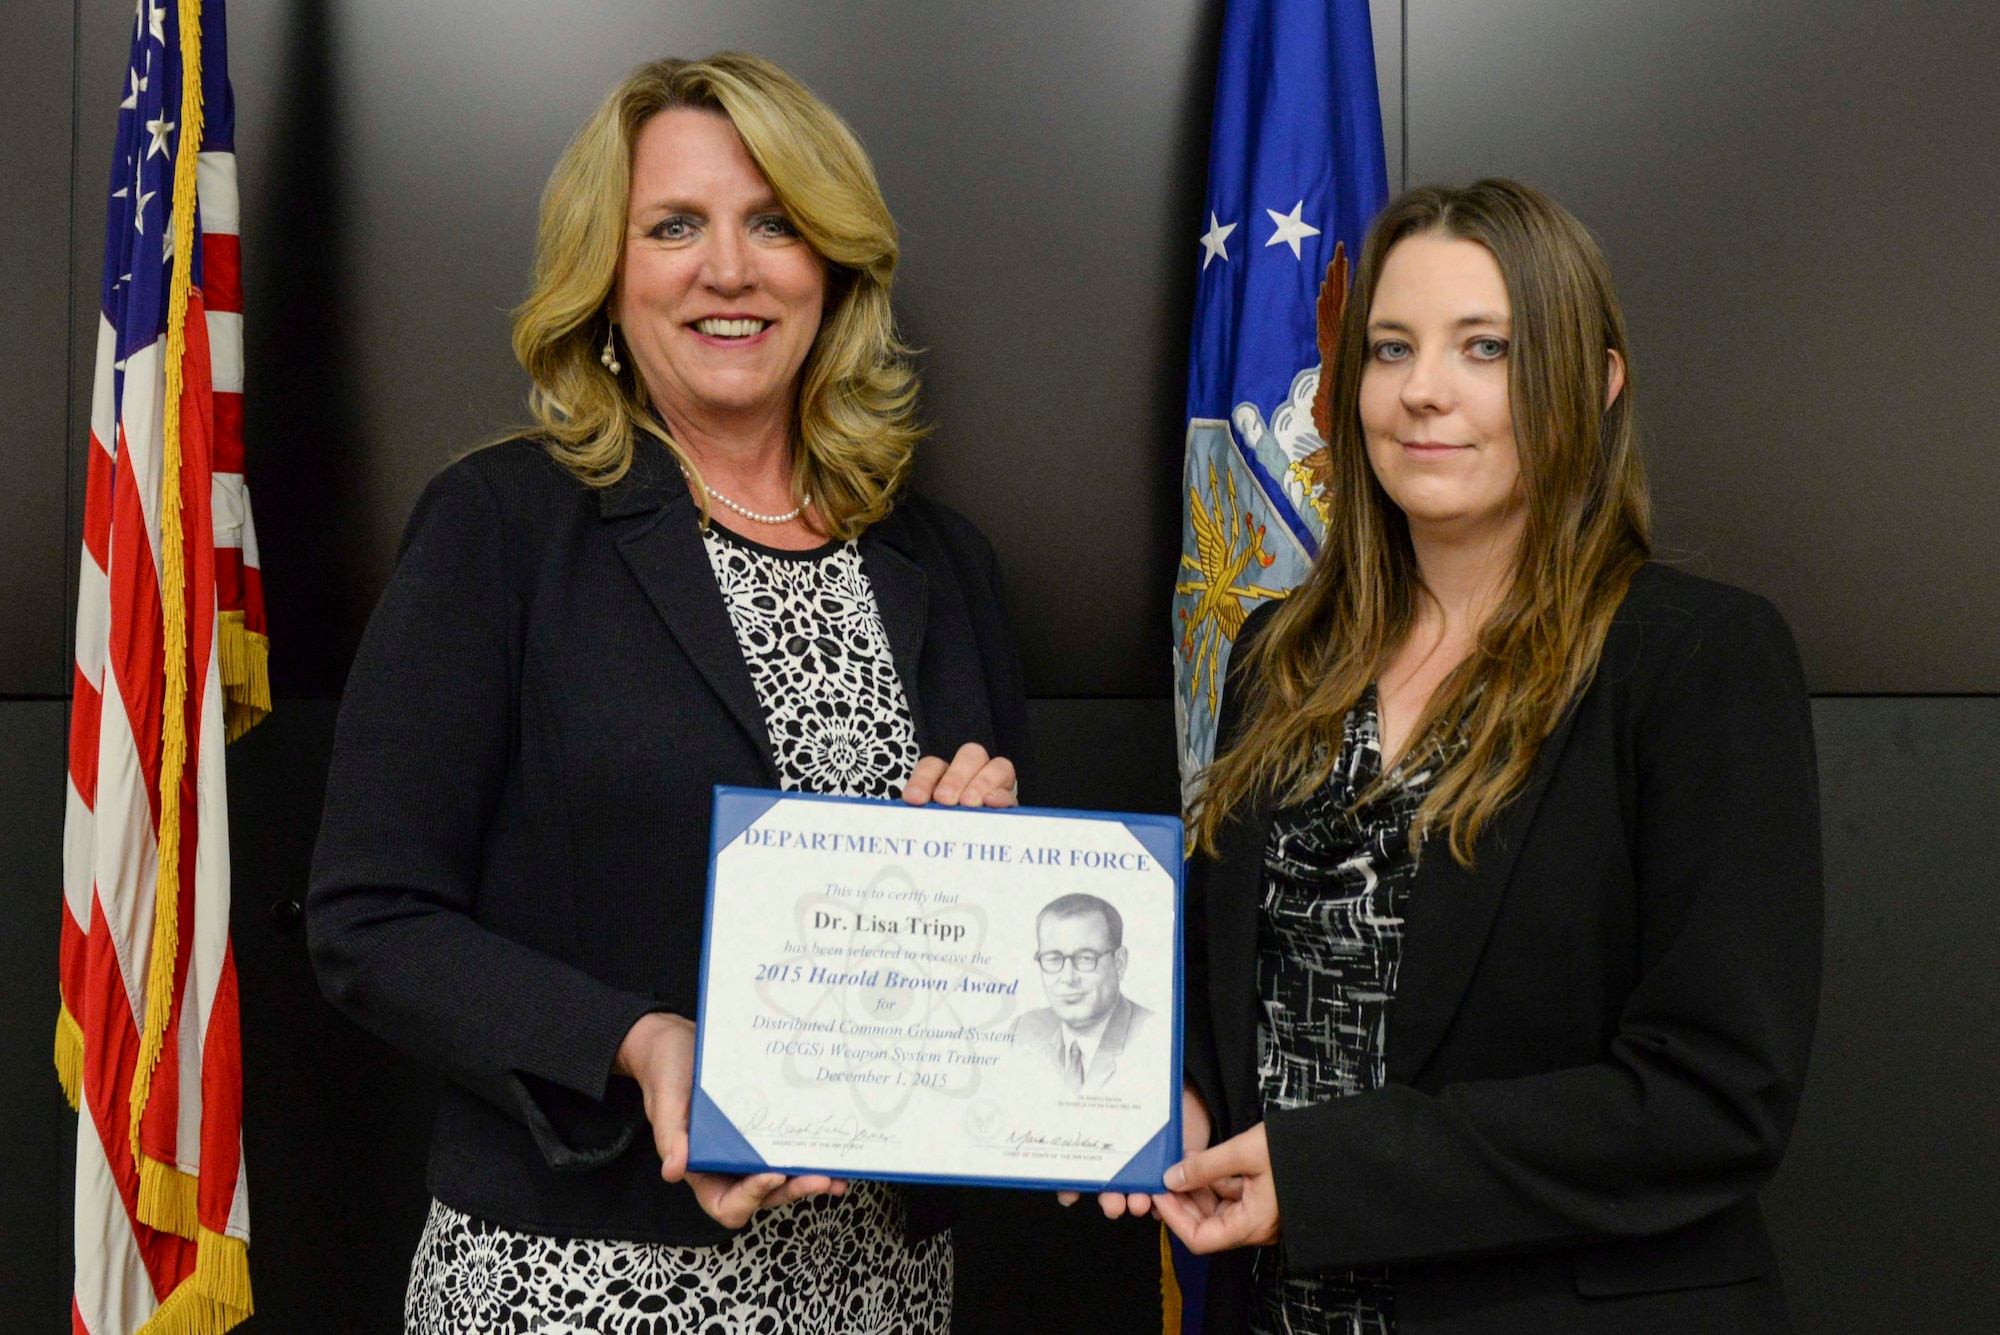 Air Force Secretary Deborah Lee James, left, presents the 2015 Harold Brown Award to Dr. Lisa Tripp during a ceremony June 6, 2016, at Wright-Patterson Air Force Base, Ohio. The award, the highest given by the Air Force to a scientist or engineer, was for Tripp’s efforts in creating innovative and cost-saving training methods and platforms for the Air Force intelligence community. (U.S. Air Force photo/Wesley Farnsworth)